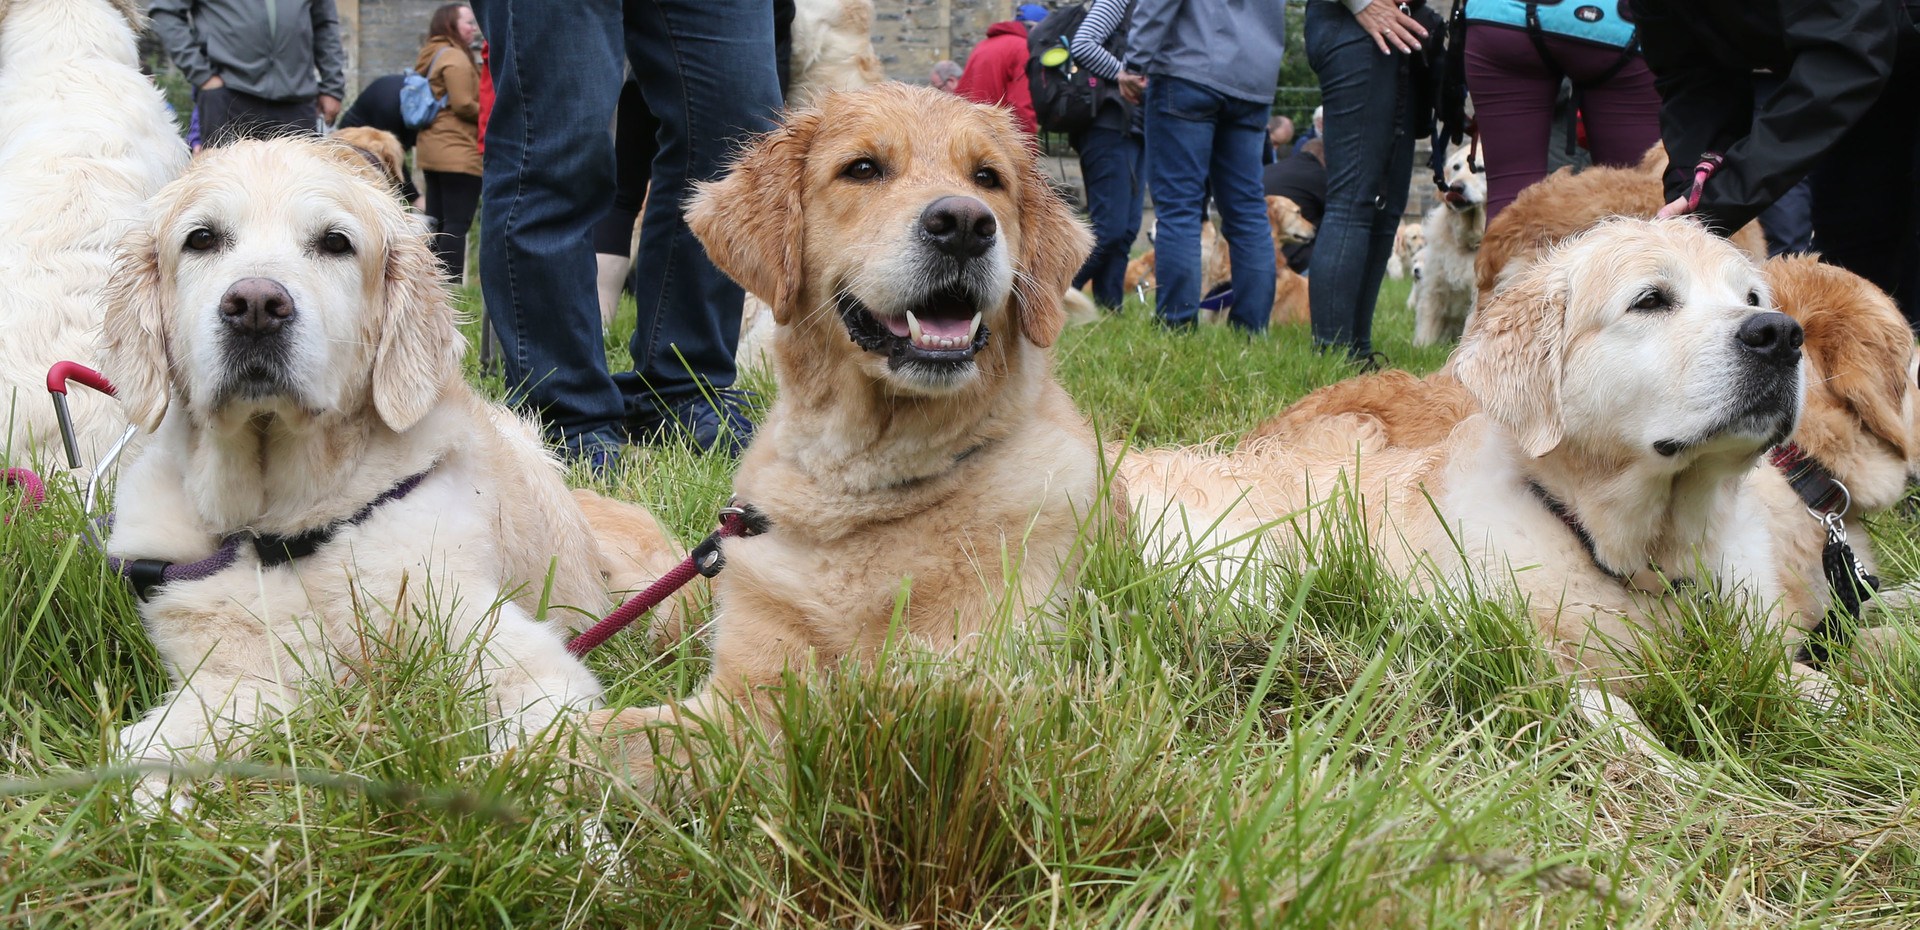 Hundreds of dogs and owners from across the UK, continental Europe, North America, Australia and Japan met on Thursday